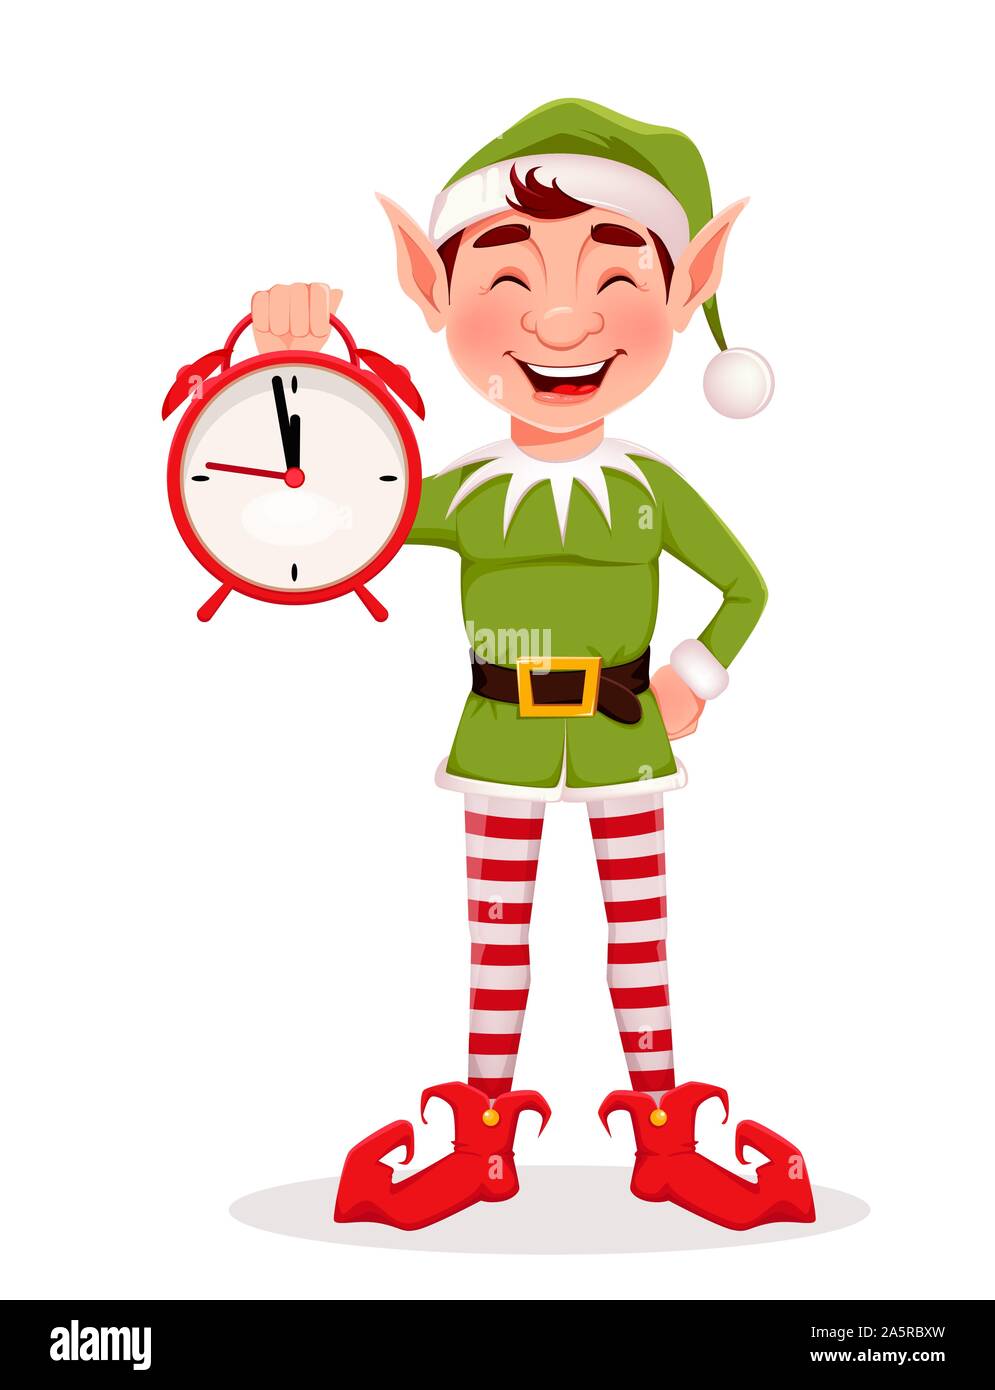 Merry Christmas greeting card with funny Elf. Santa Claus helper Elf holding alarm clock. Cartoon character. Vector illustration on white background Stock Vector